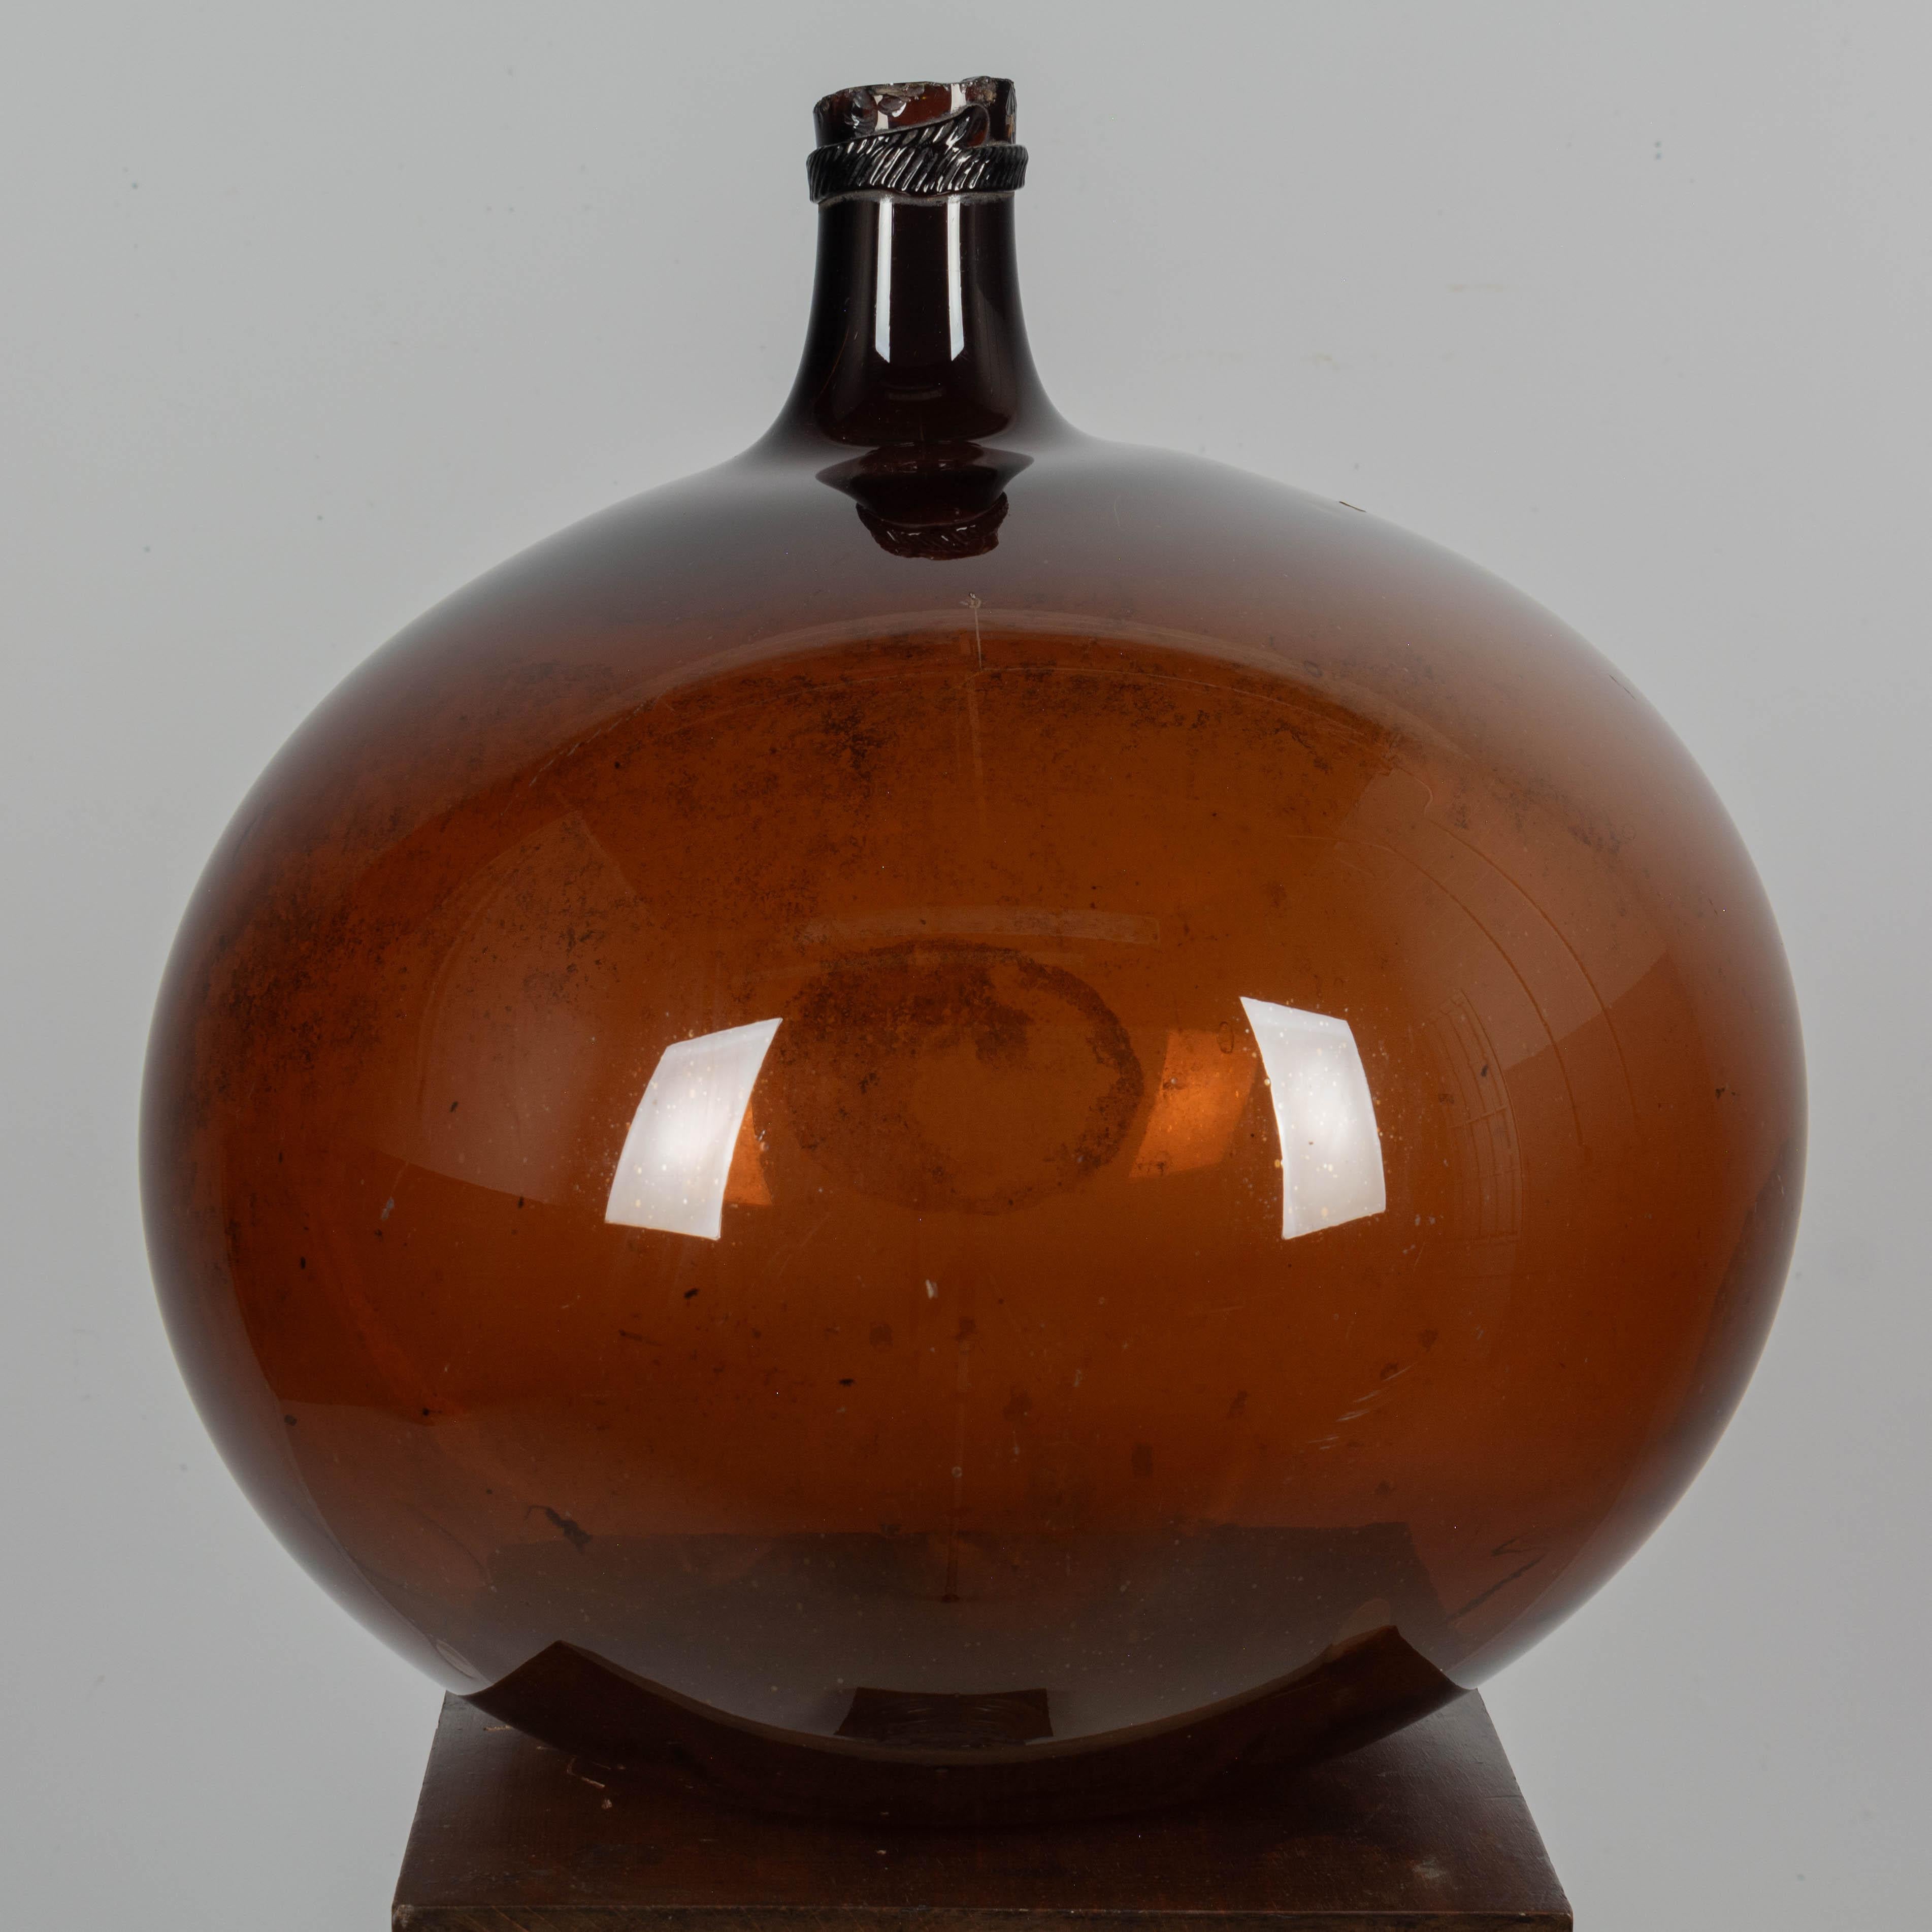 A large 19th century French globular form amber demijohn bottle with air bubbles typical of handblown glass. Circa 1850-1860
Dimensions: 18